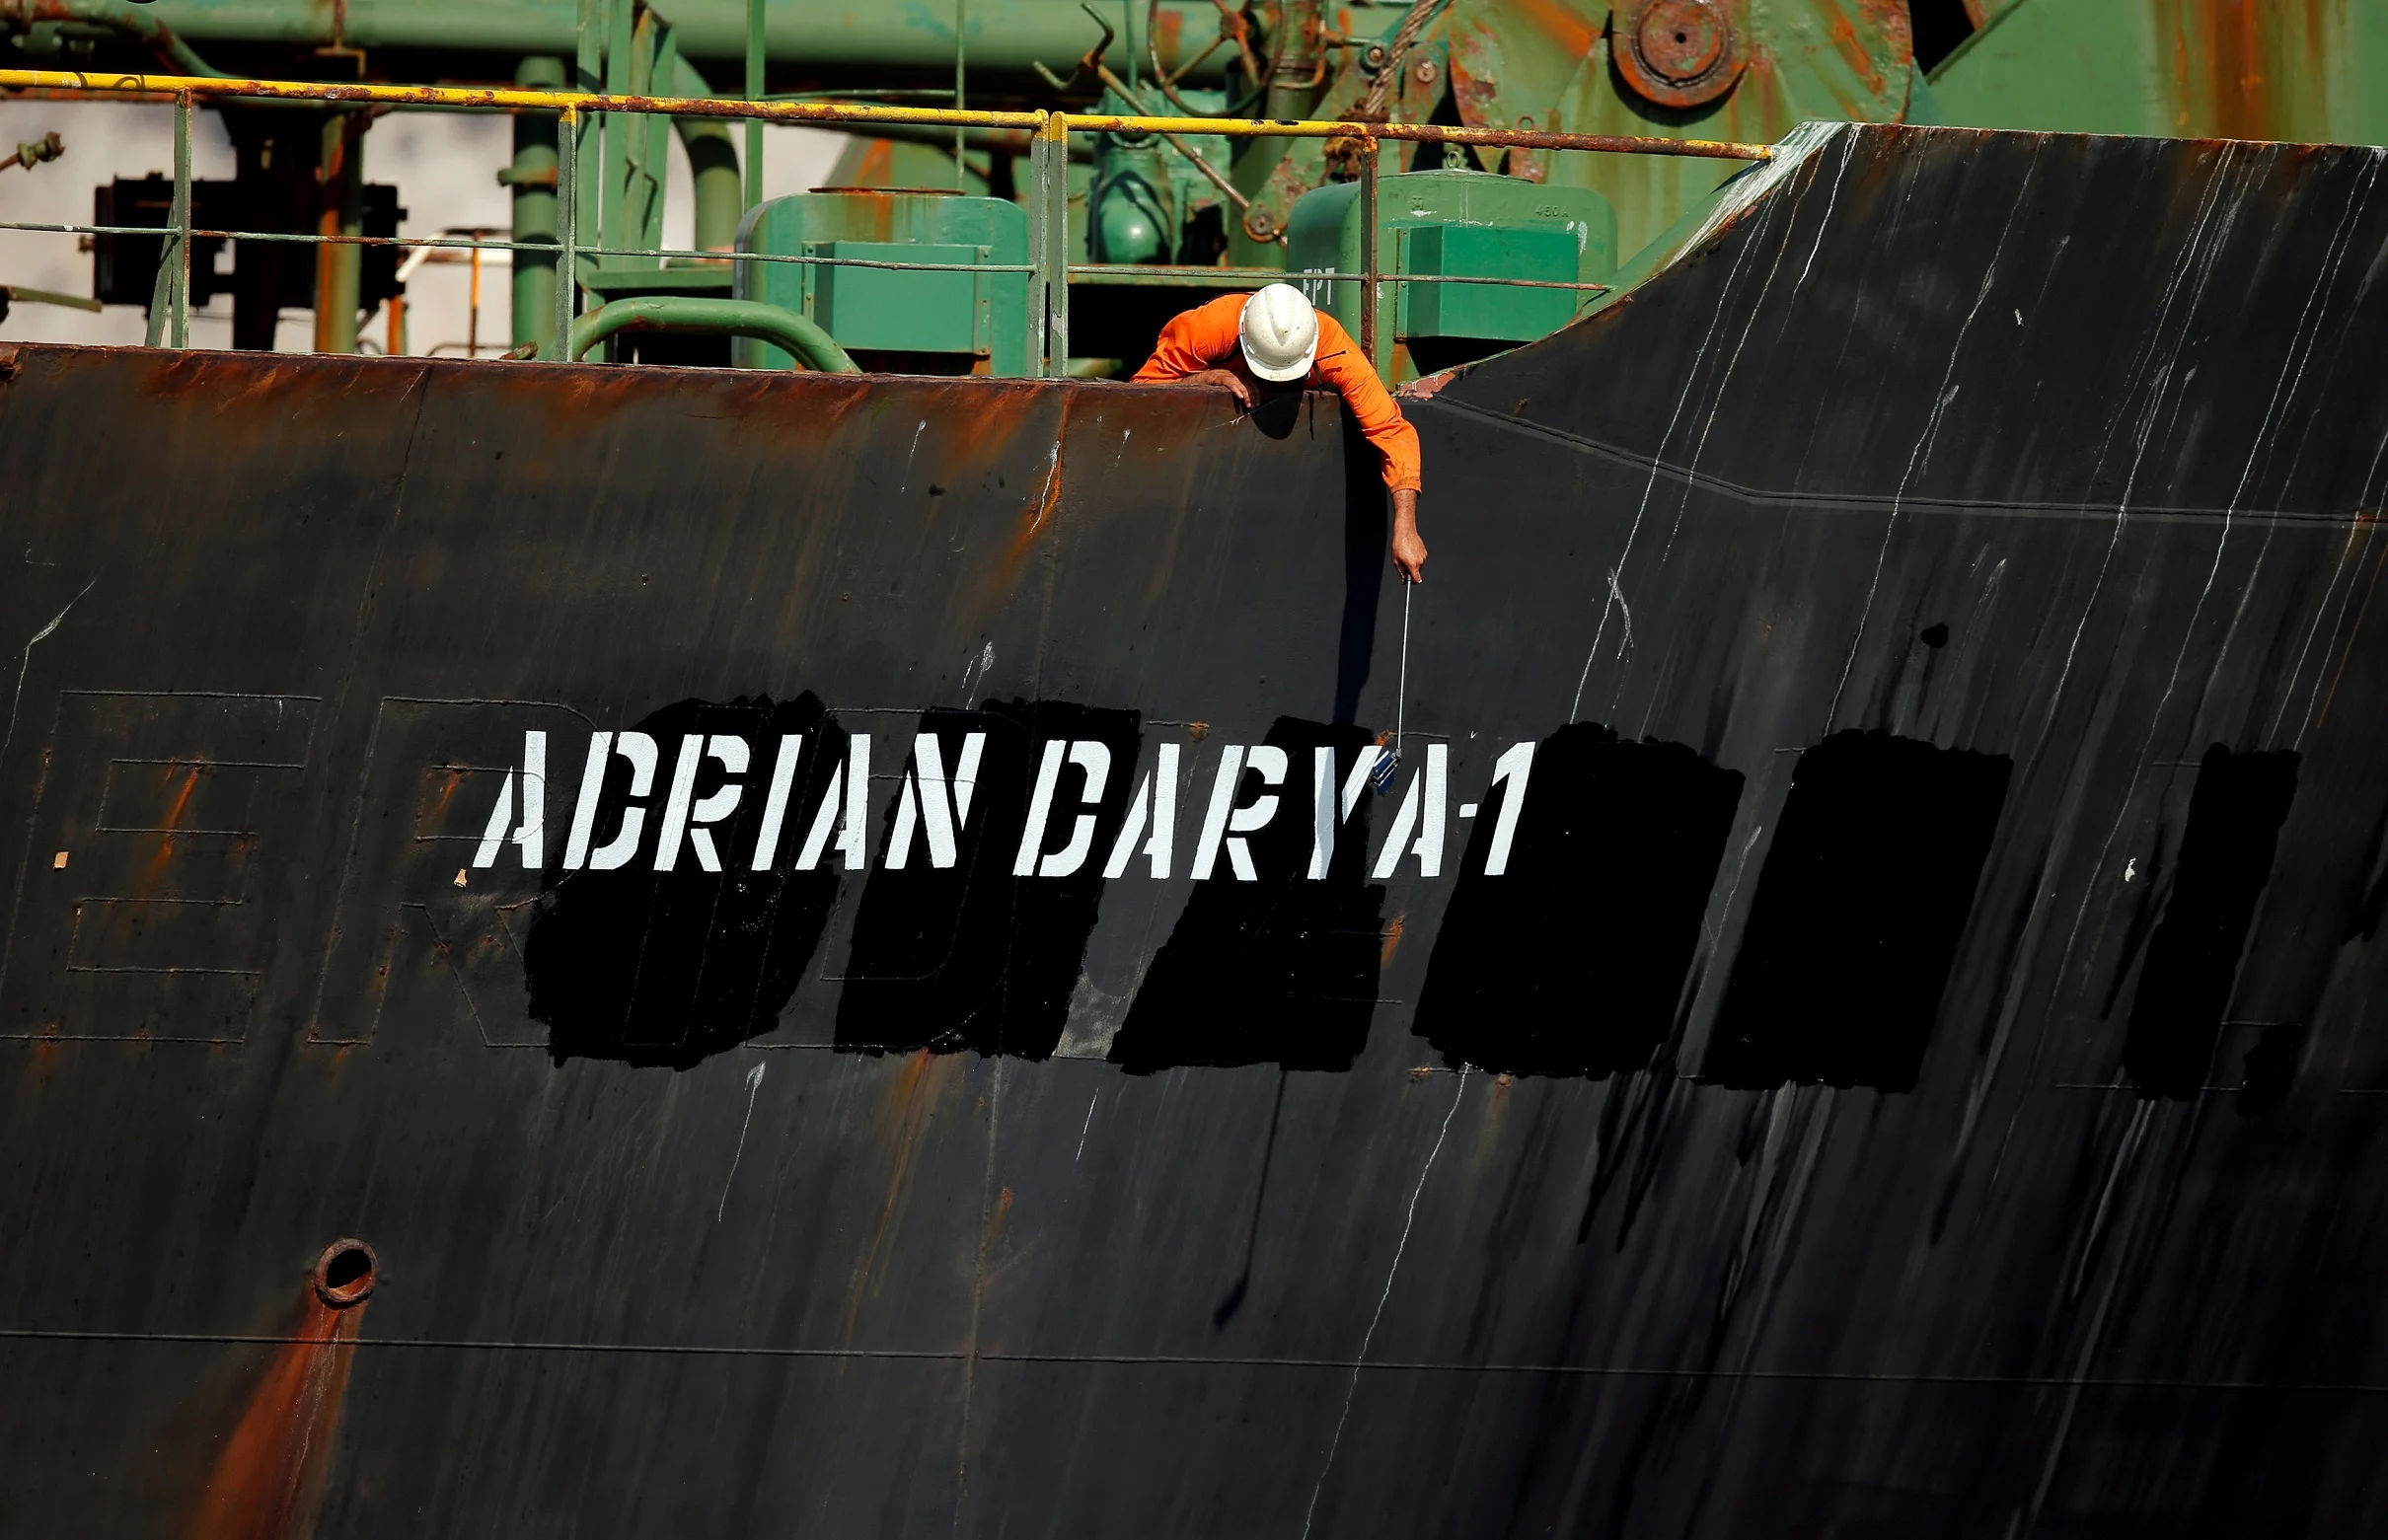 A Crew Member Takes Pictures With A Mobile Phone On Iranian Oil Tanker Adrian Darya 1, Previously Named Grace 1, Sits Anchored After The Supreme Court Of The British Territory Lifted Its Detention Order, In The Strait Of Gibraltar